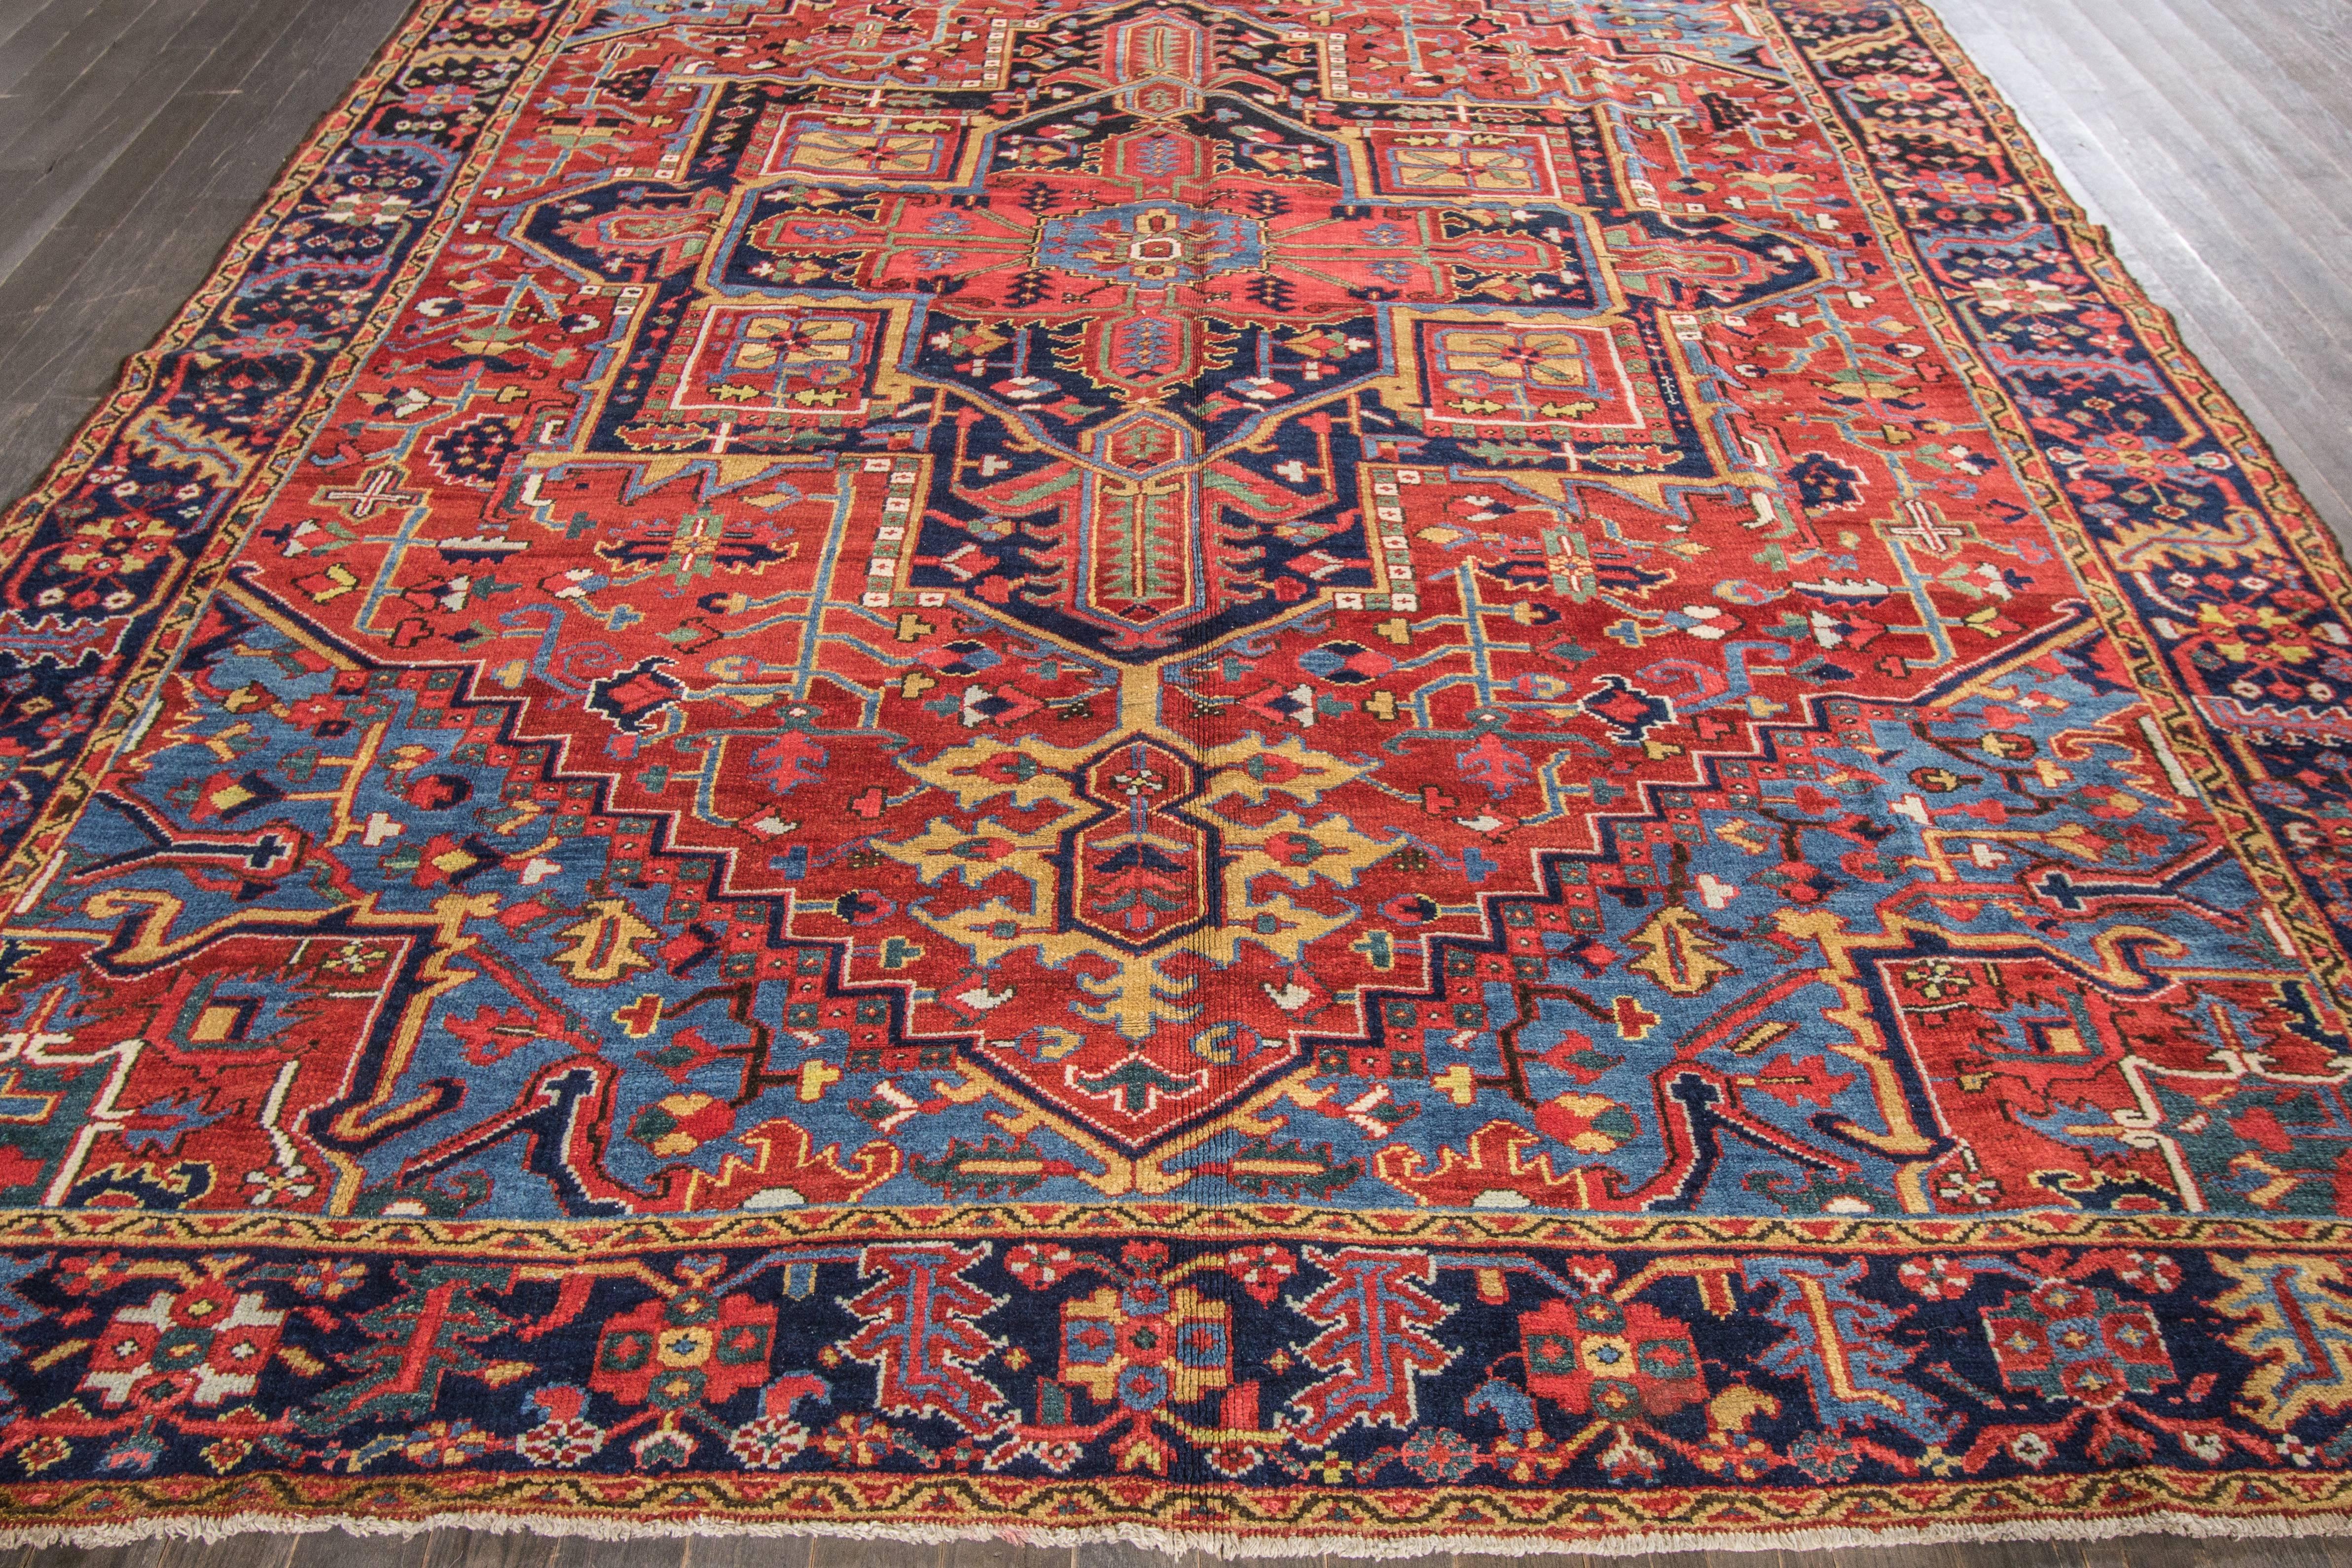 Early 20th Century Red, Blue Persian Heriz Carpet 2